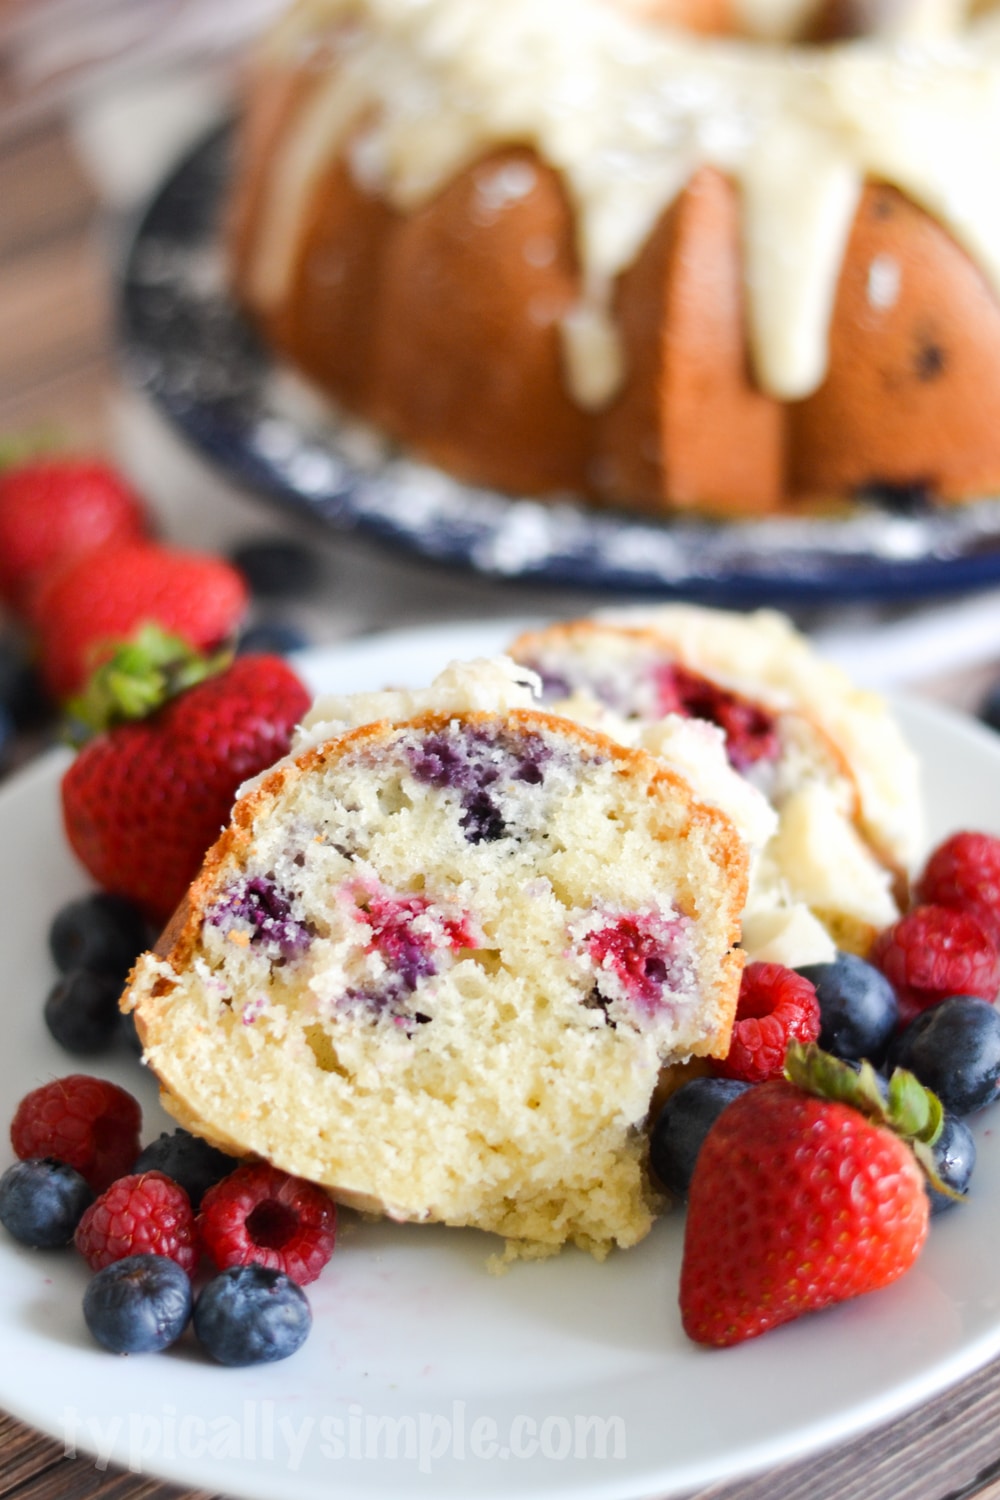 A decadent berry bundt cake recipe that is quite simple to make using fresh blueberries and raspberries. A delicious treat to serve with after dinner coffee!